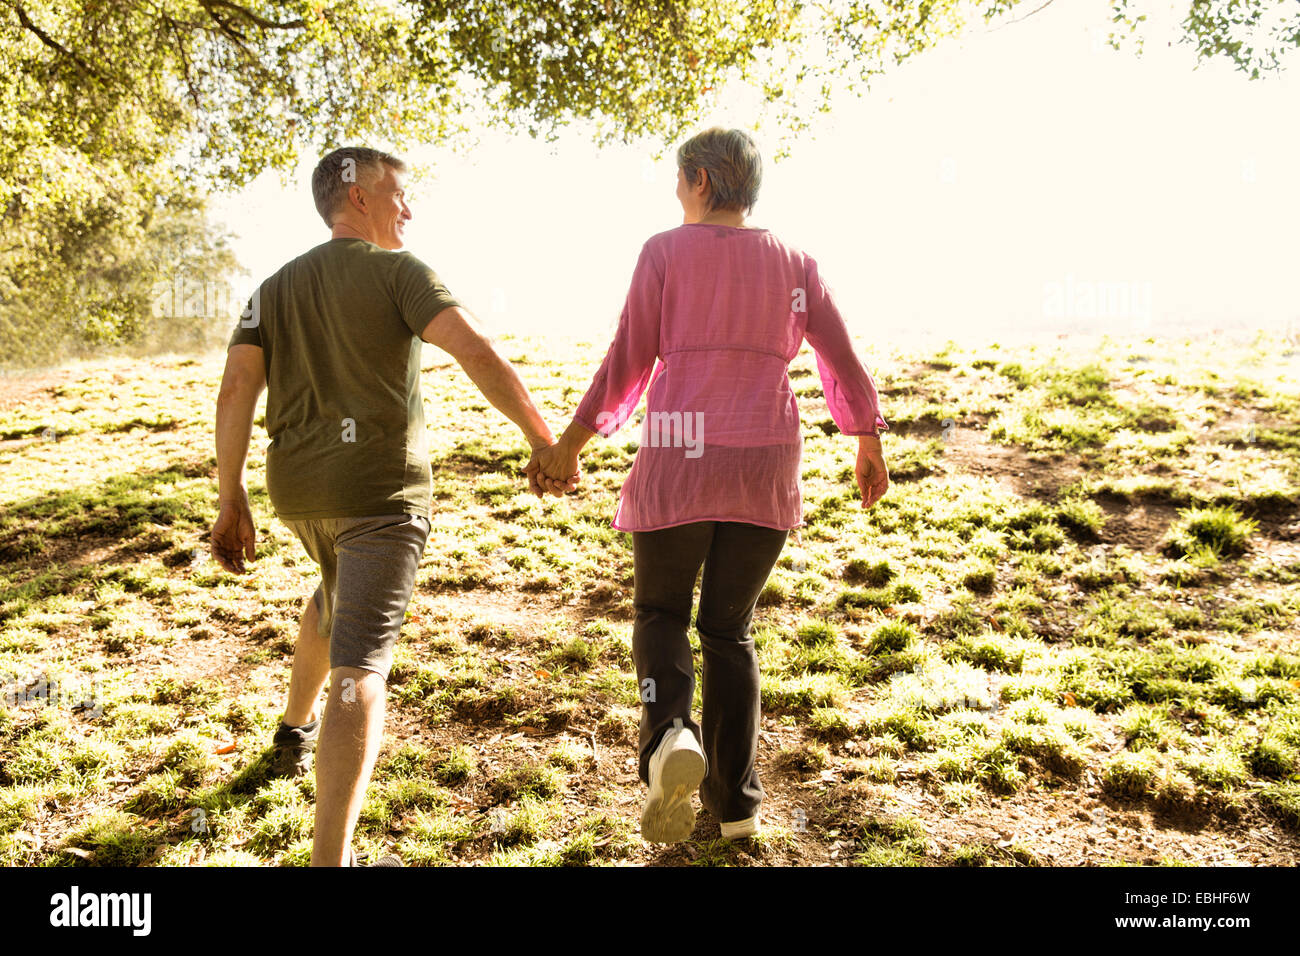 Rear view of mature couple power walking in park Stock Photo